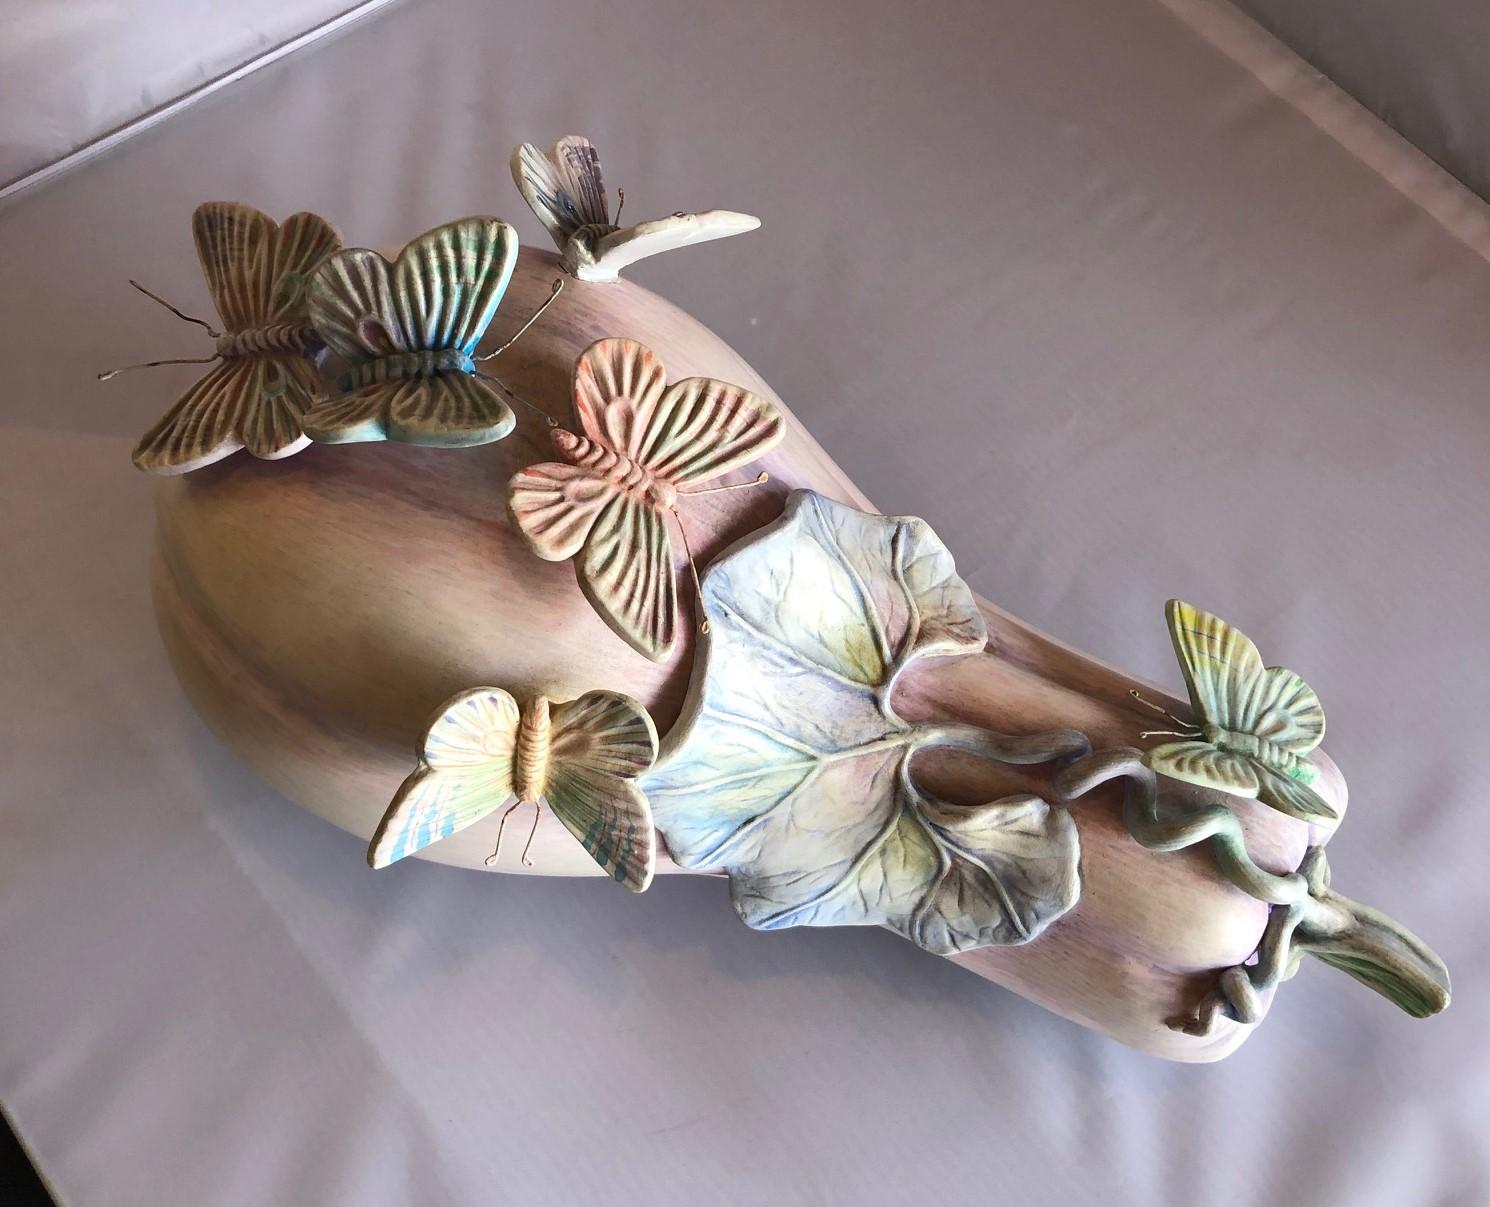 Mid-Century Modern Whimsical Ceramic Butterflies on Squash Sculpture by Sergio Bustamante